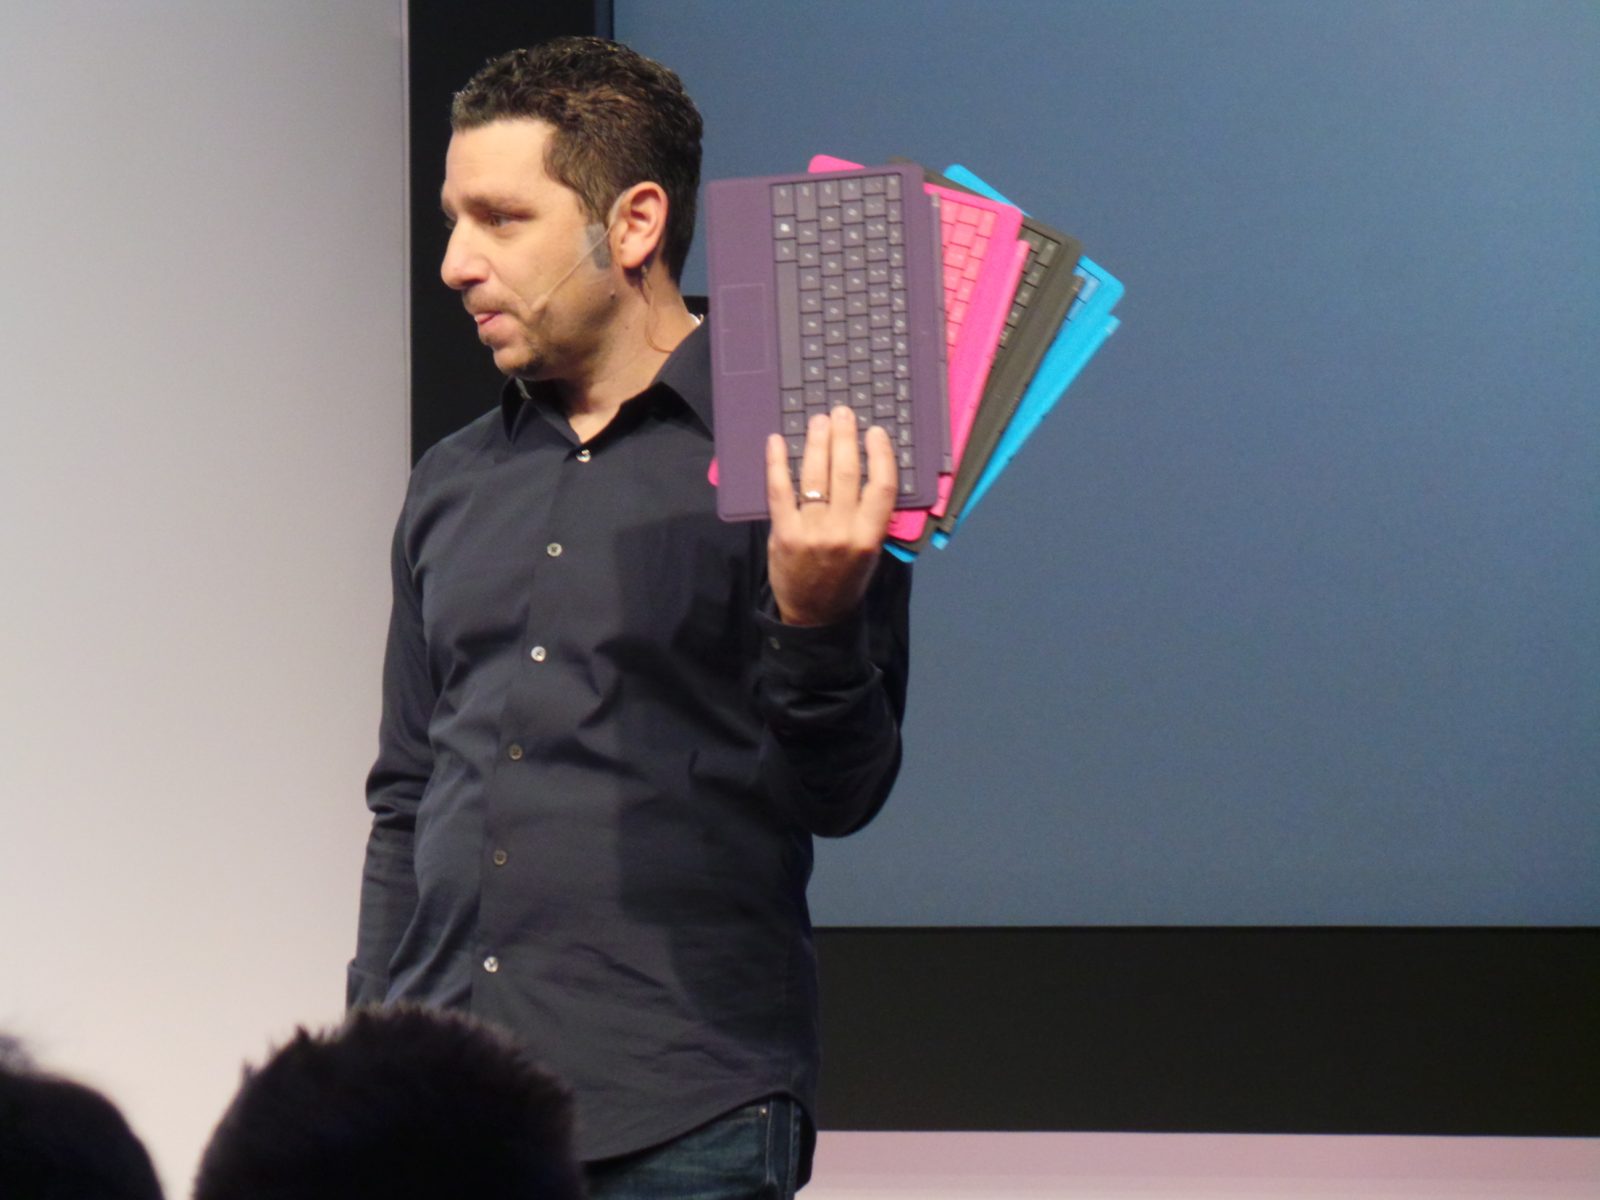 Microsoft Surface 2 and Surface Pro 2 Type Covers (Keyboards)